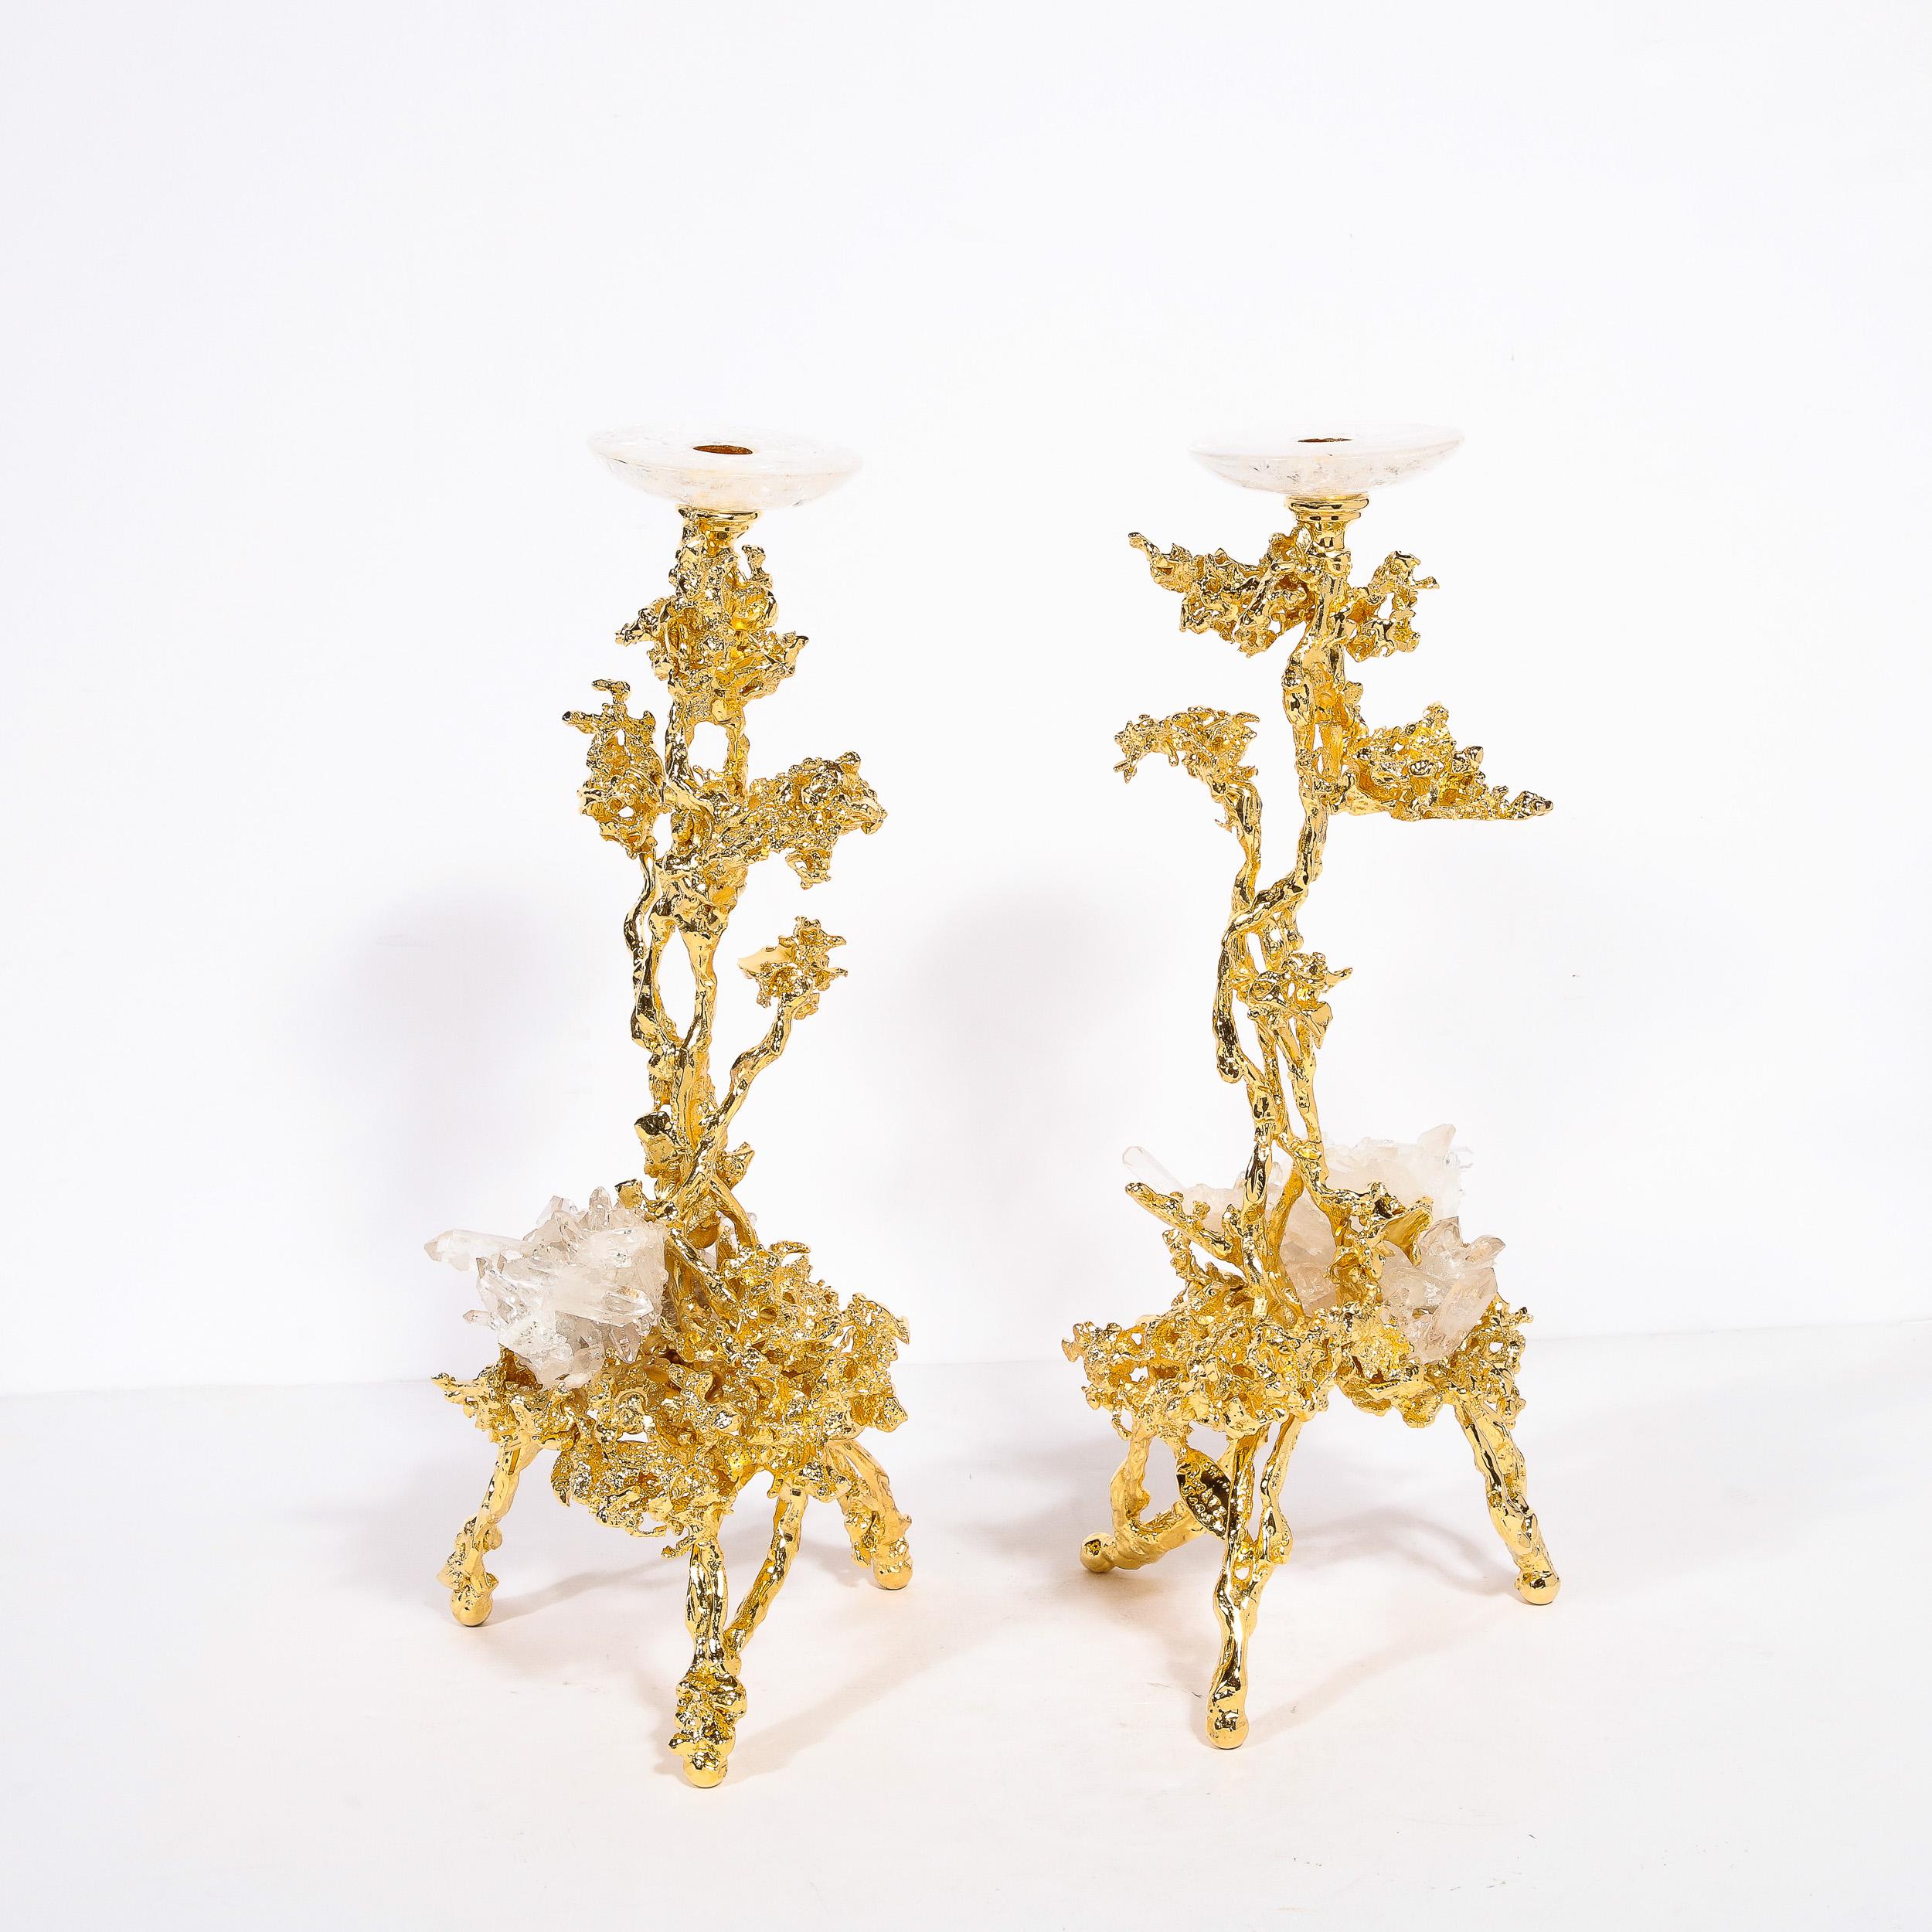 Pair of 24K Gold Single Branch Candleholders w/ Rock Crystals by Claude Boeltz For Sale 6